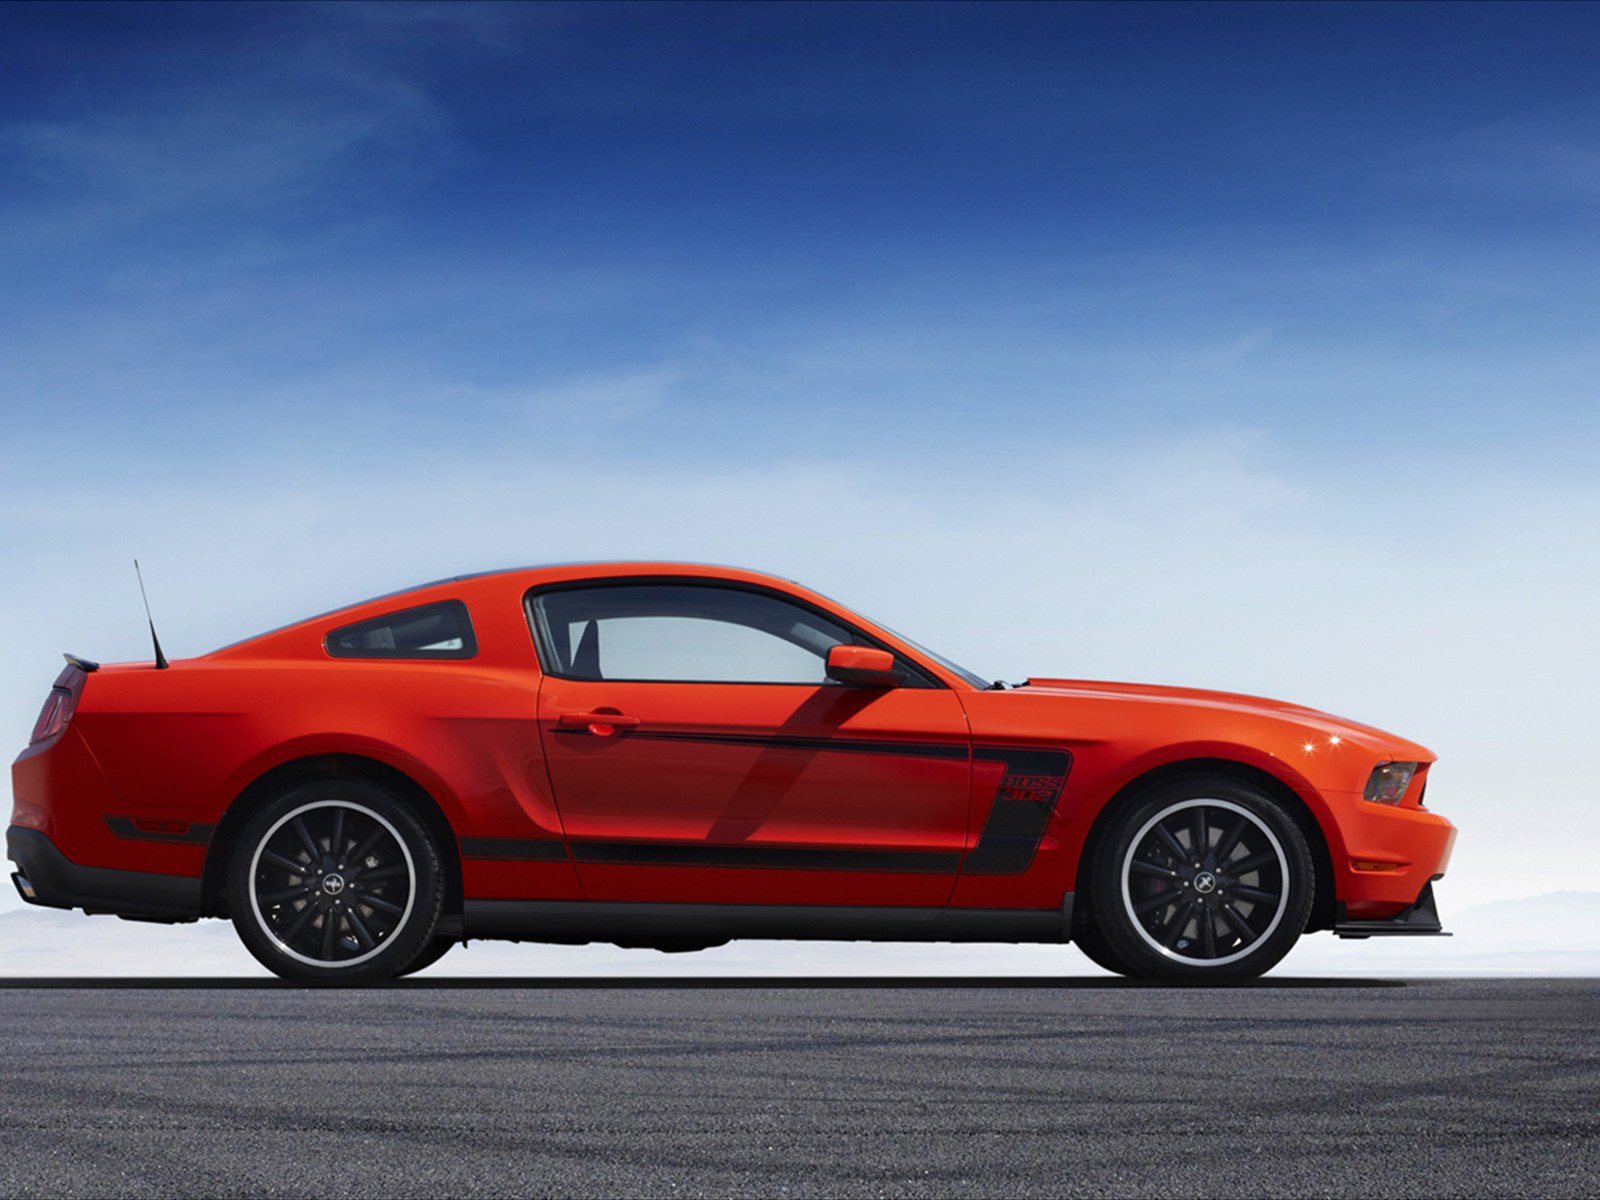 Download full size red Boss 302 Mustang wallpaper / 1600x1200